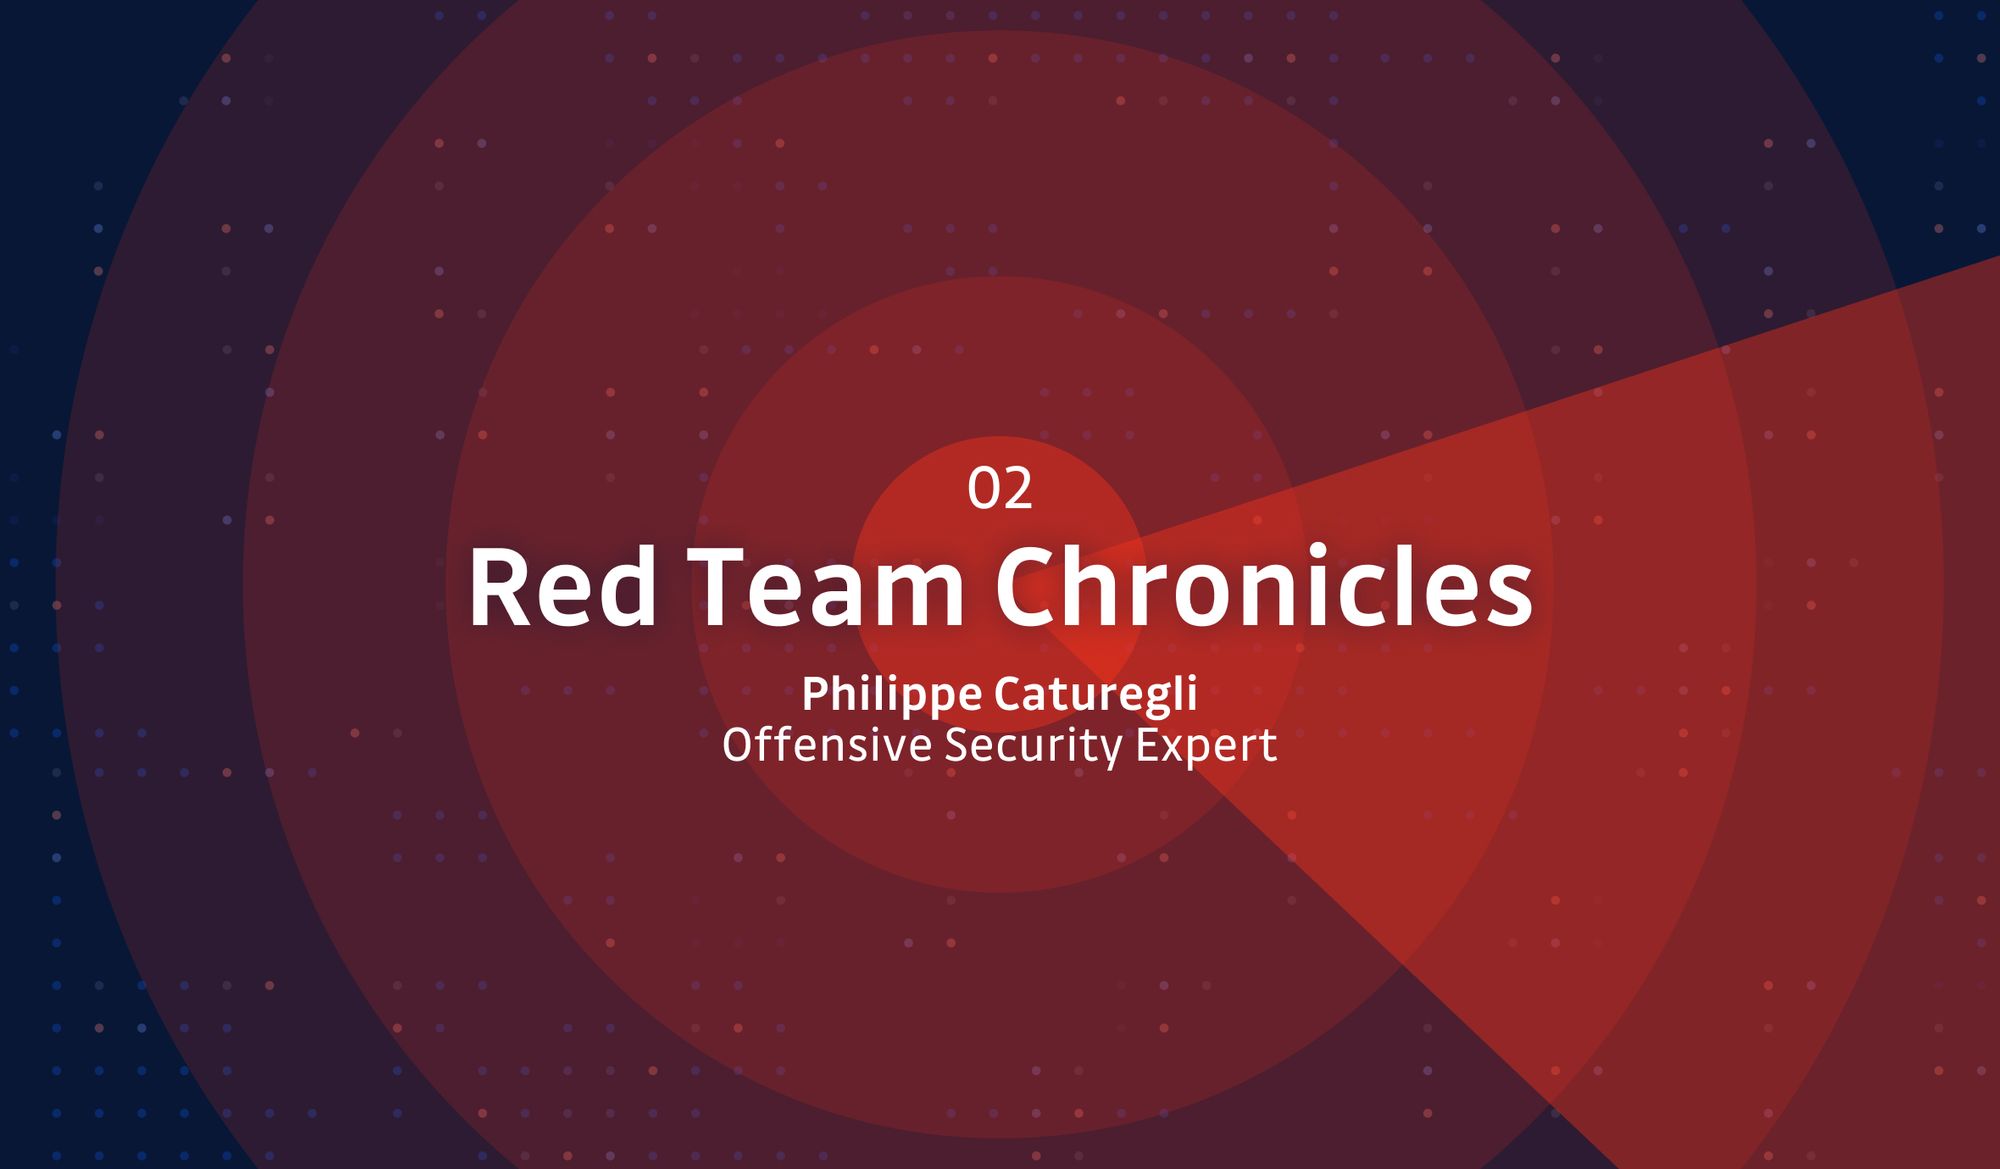 Red Team Chronicles Episode 2 - There is no such thing as a “miracle solution”